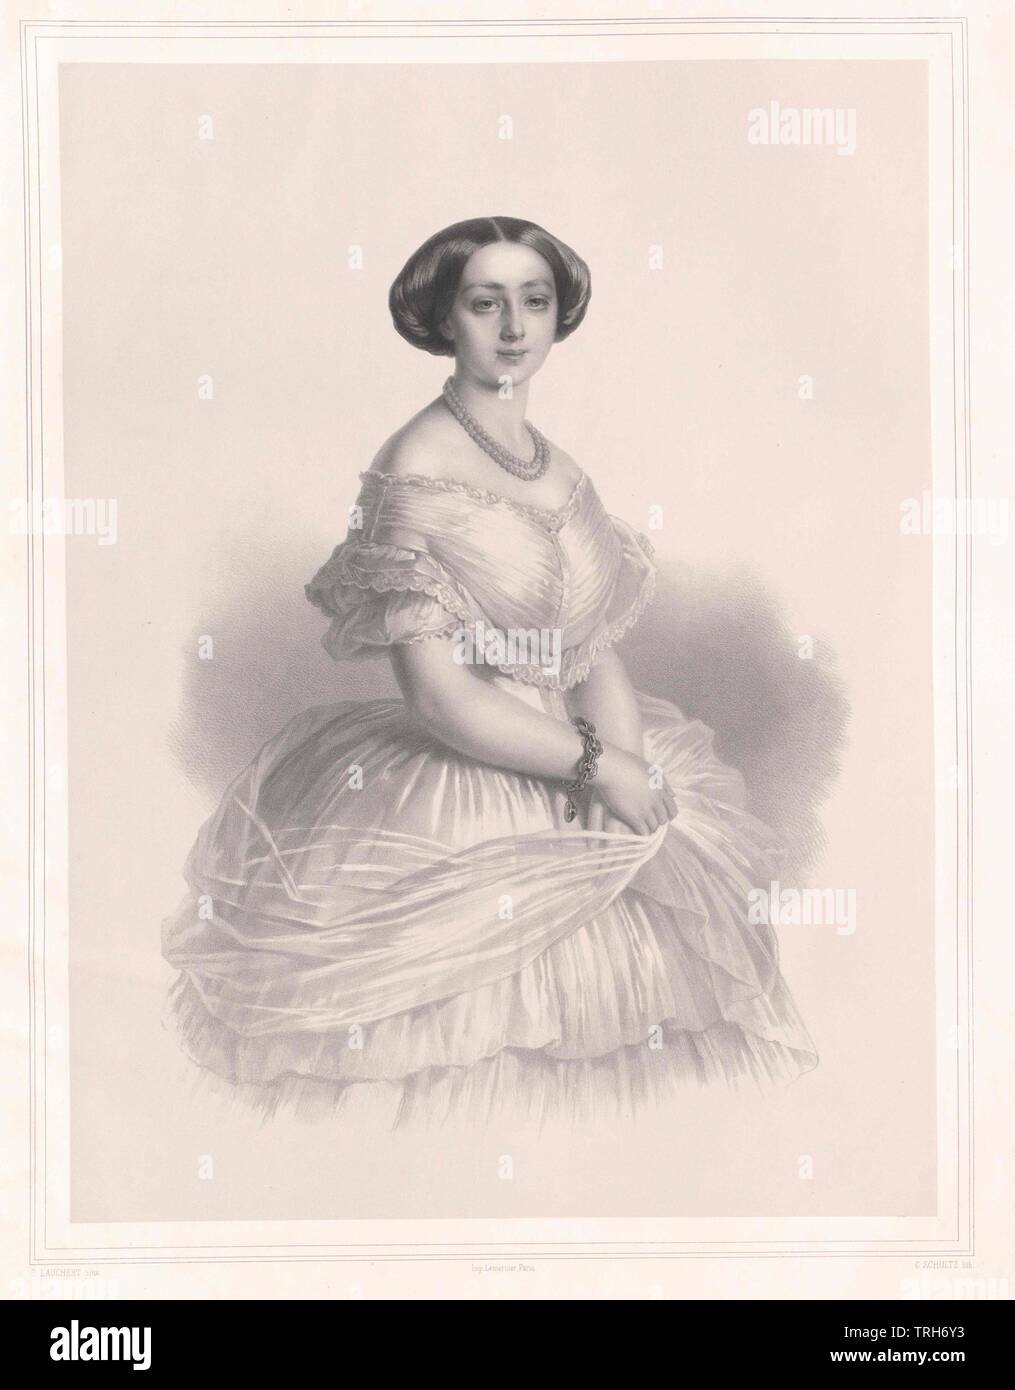 Marie, Princess of Baden,Baden, margrave, margrave and landgraves, miscellaneous potentates, people, half-length, half length, woman, women, female, princess, princesses, Additional-Rights-Clearance-Info-Not-Available Stock Photo